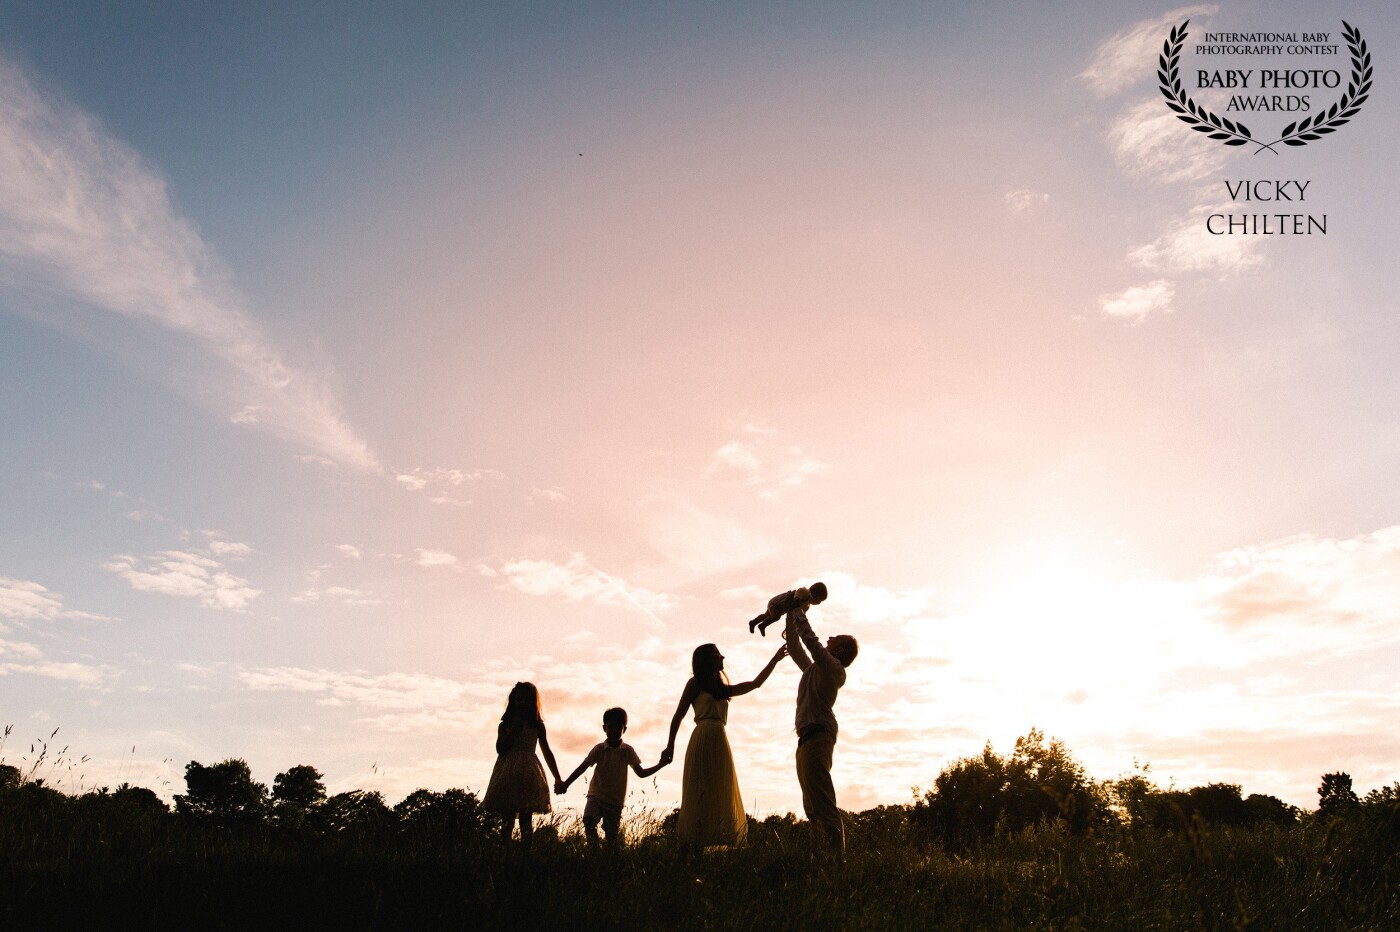 Outdoor family sessions have my heart! Even in London you can get sunsets like that and create stunning silhouettes. This will be the closing page of their family album! #creatememories